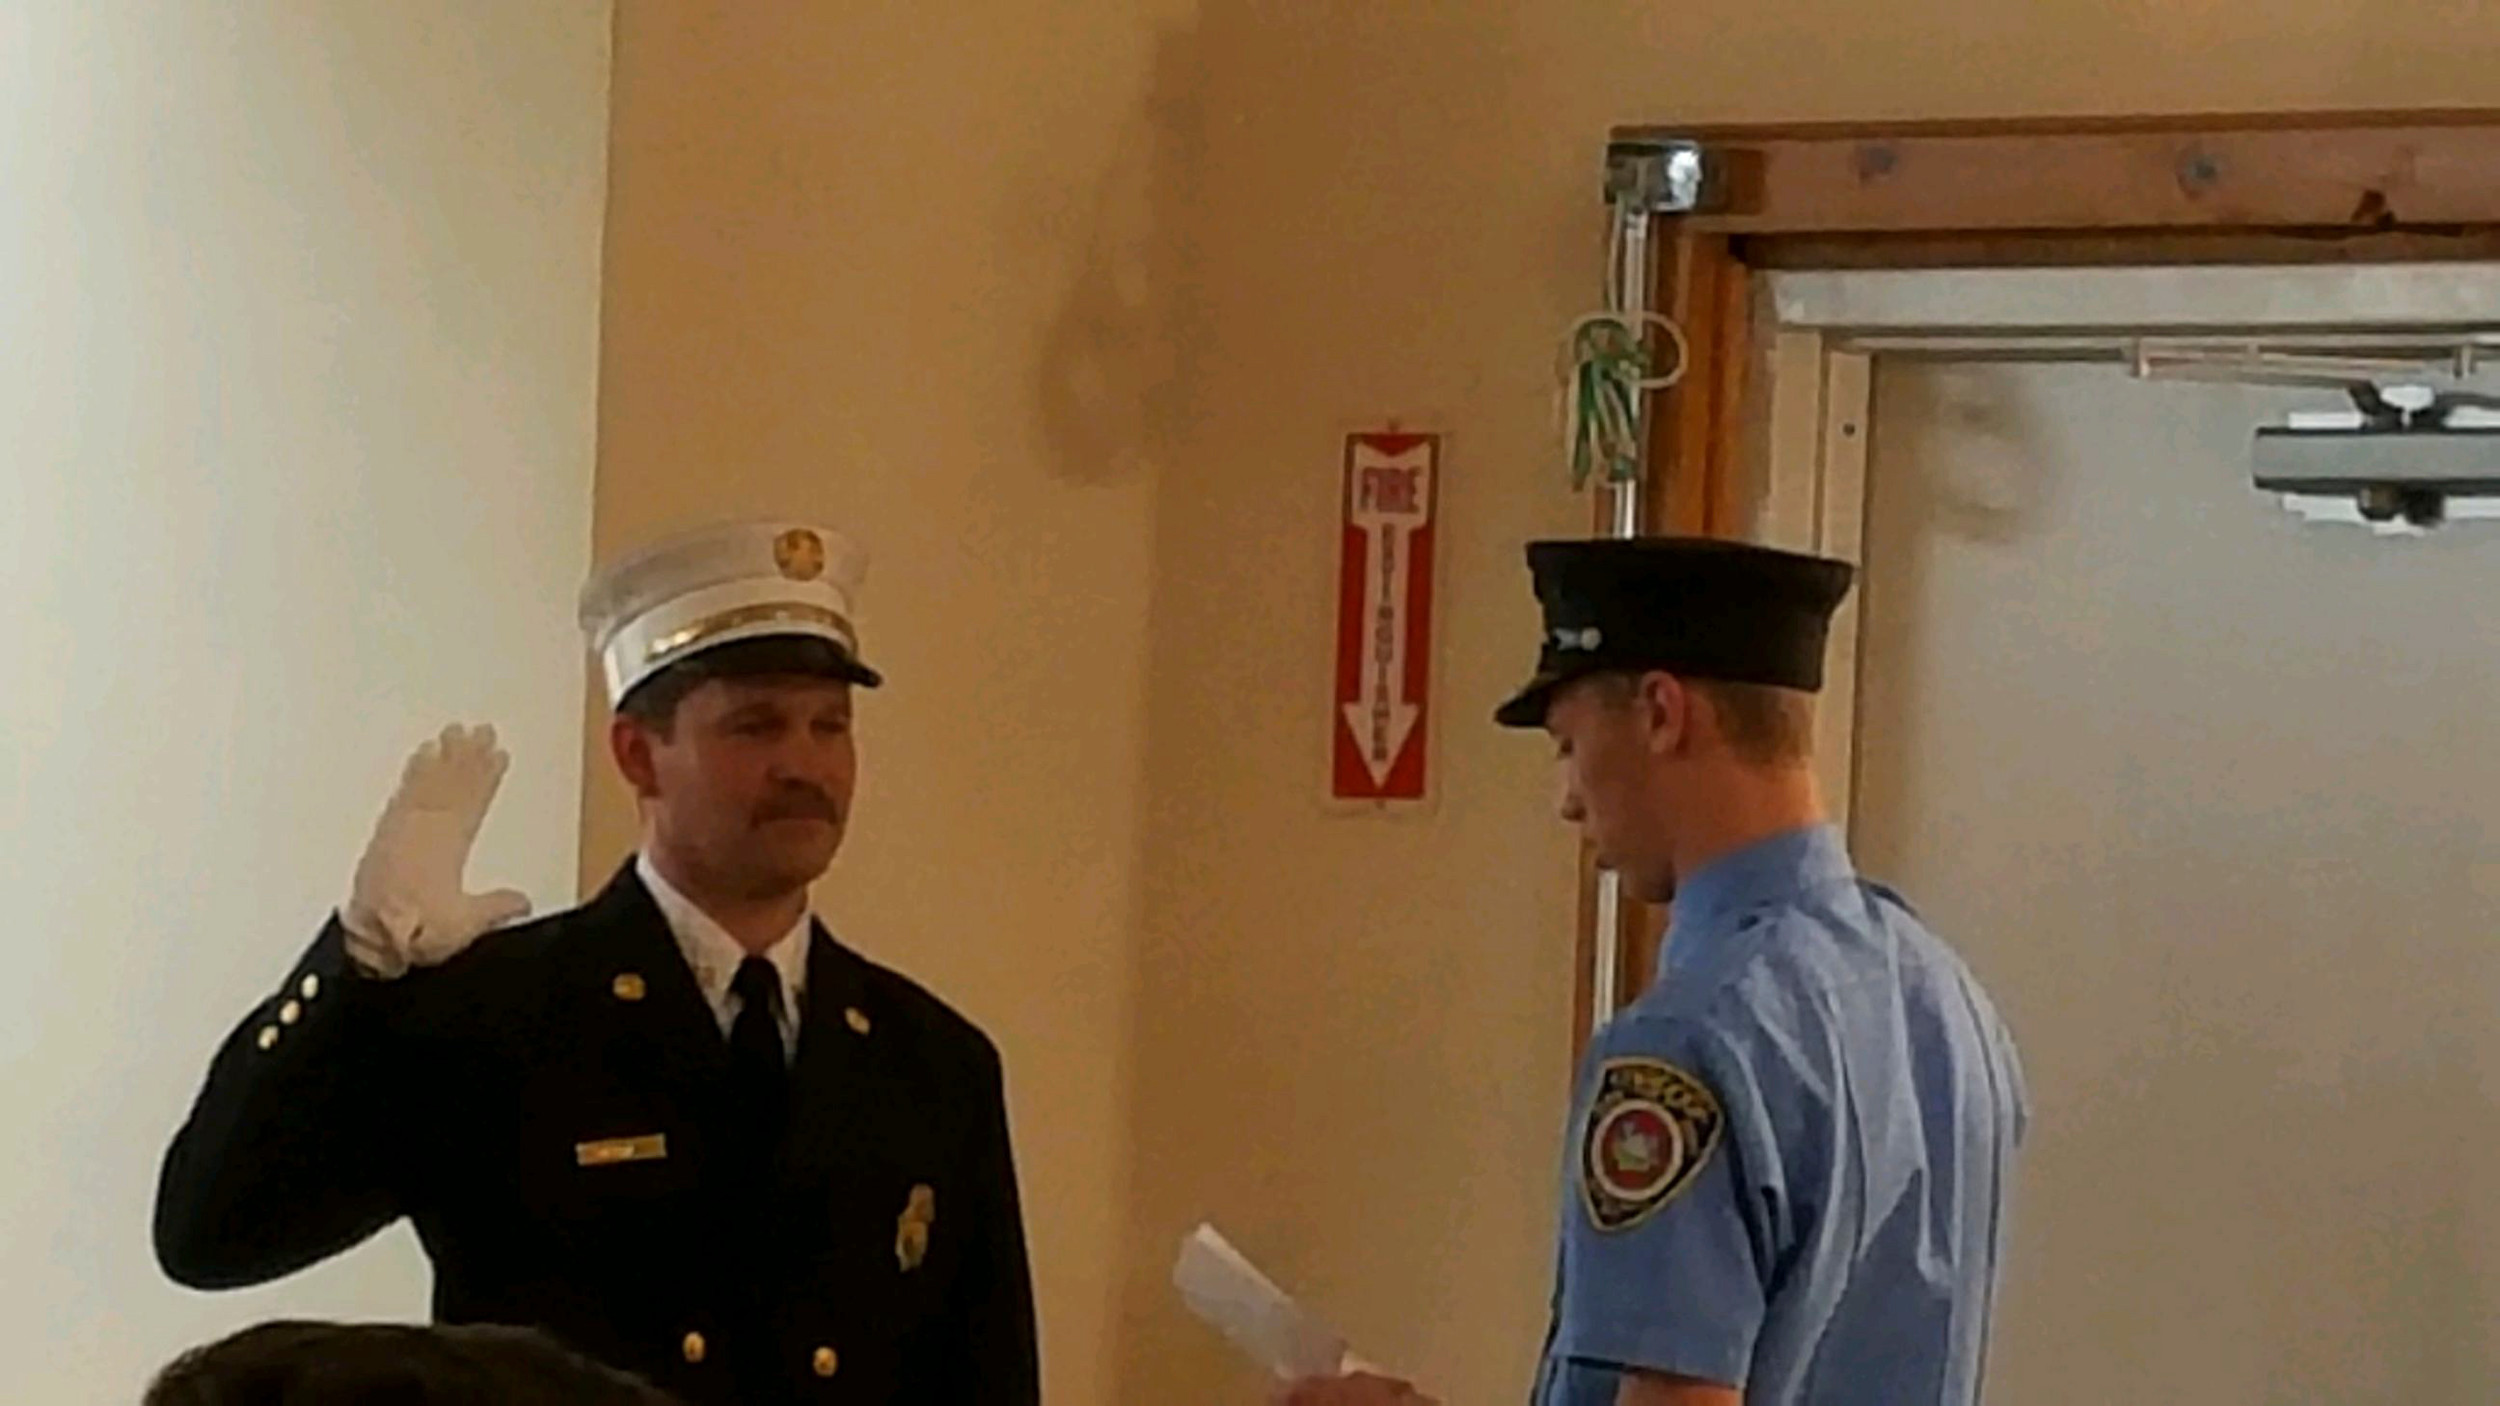 James Merkel swore in his father, Tom, as the new chief of the East Rockaway Fire Department on April 18. It marked the first time a chief was sworn in by his son.